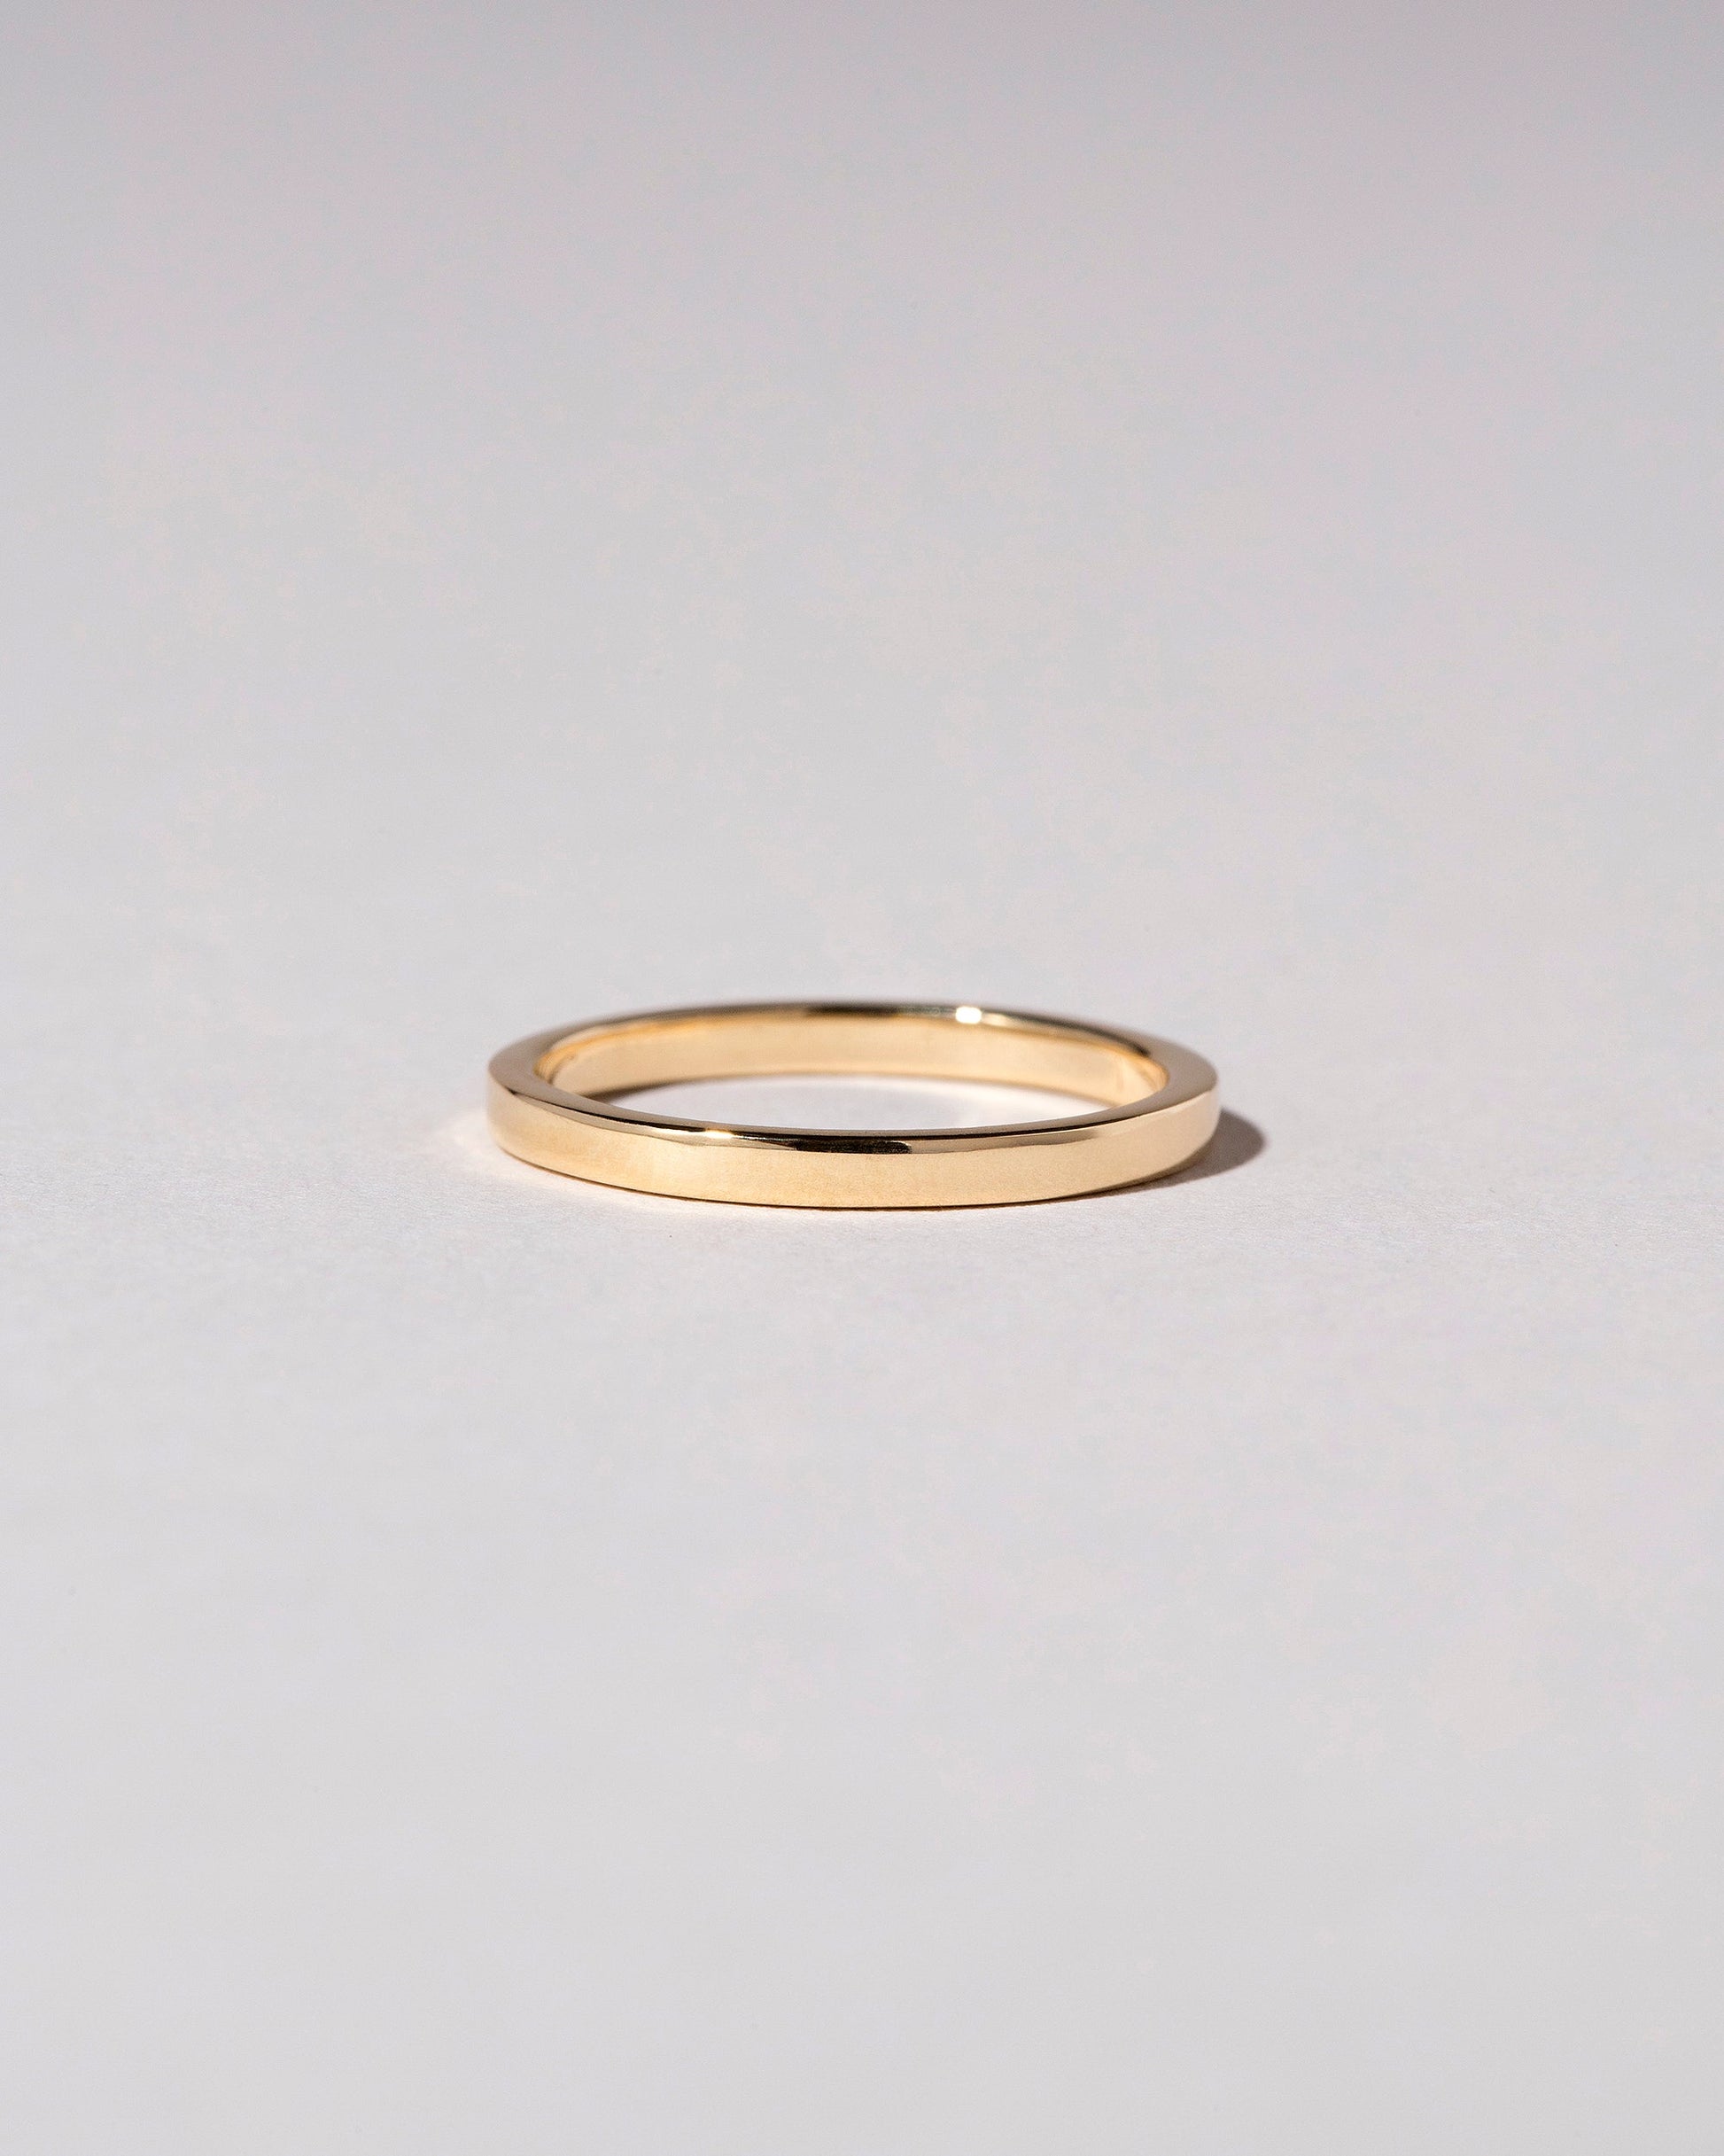 Gold 2mm Square Wire Band on light color background.